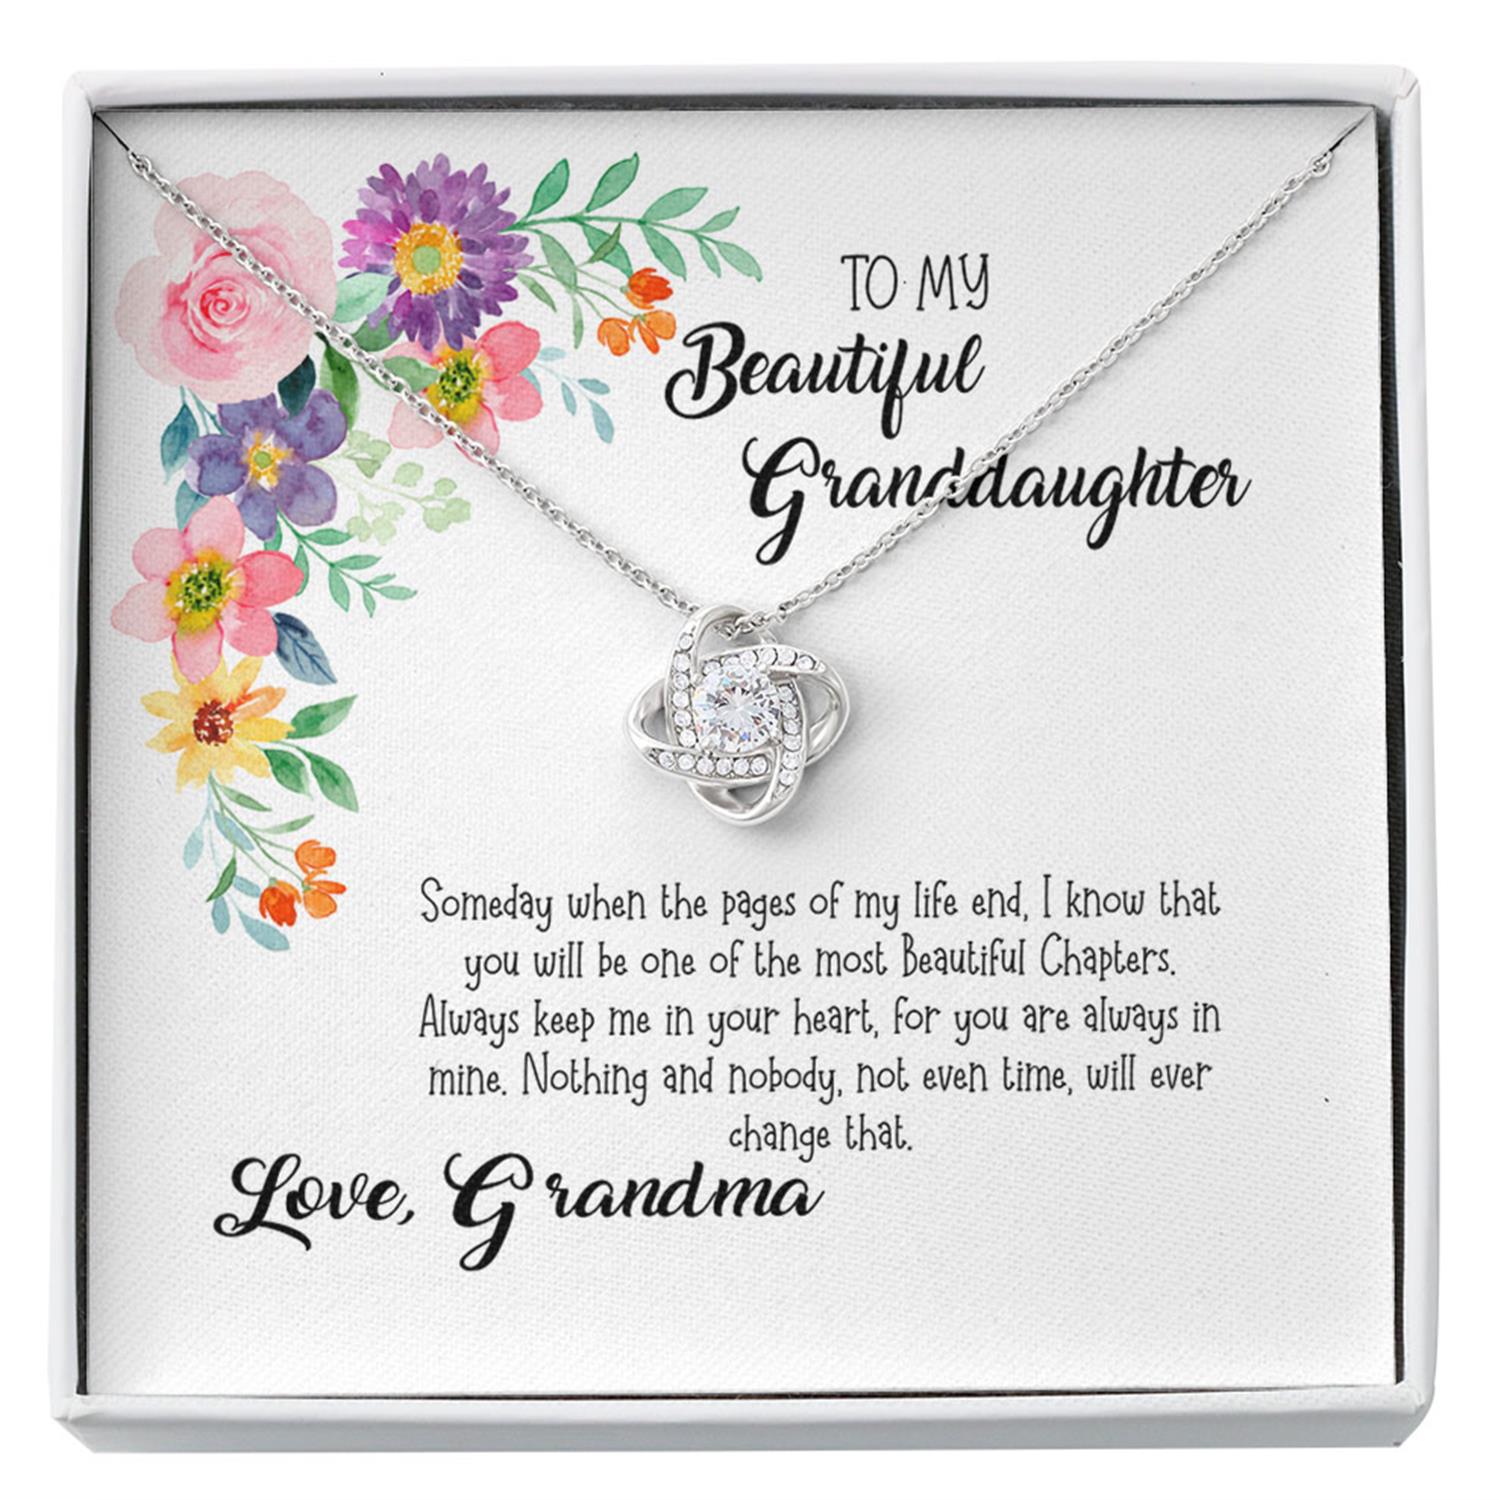 Granddaughter Necklace, To My Granddaughter Necklace - Gift For Granddaughter From Grandma Custom Necklace